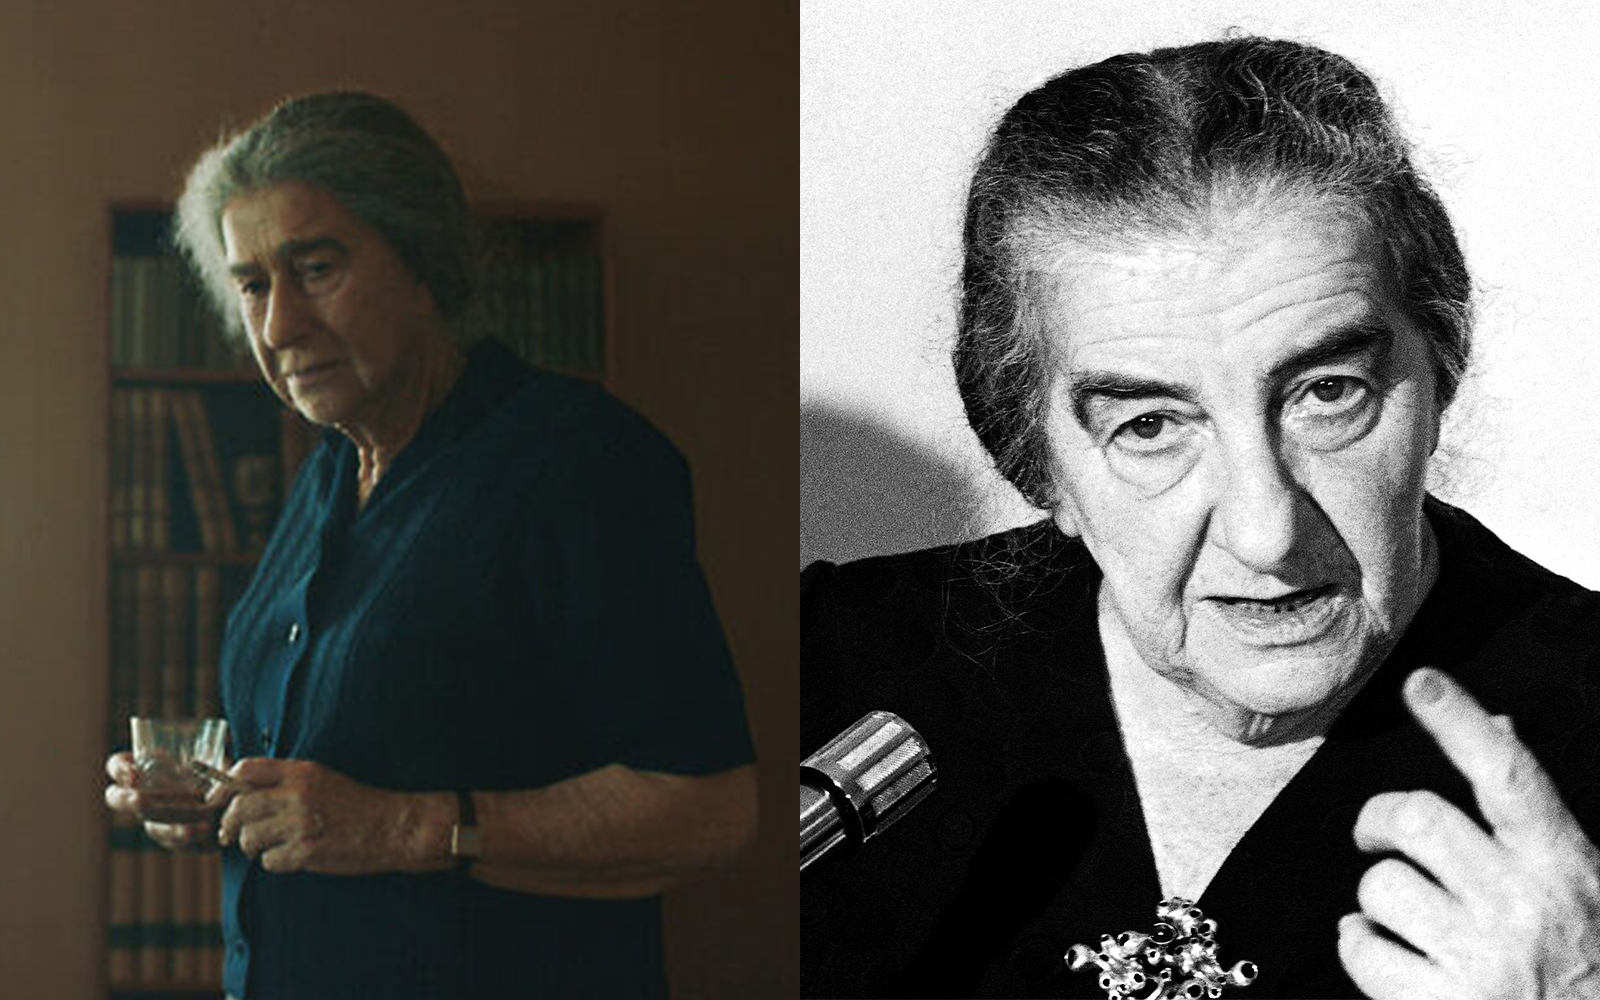 Helen Mirren plays Golda Meir in a new film. The two are also